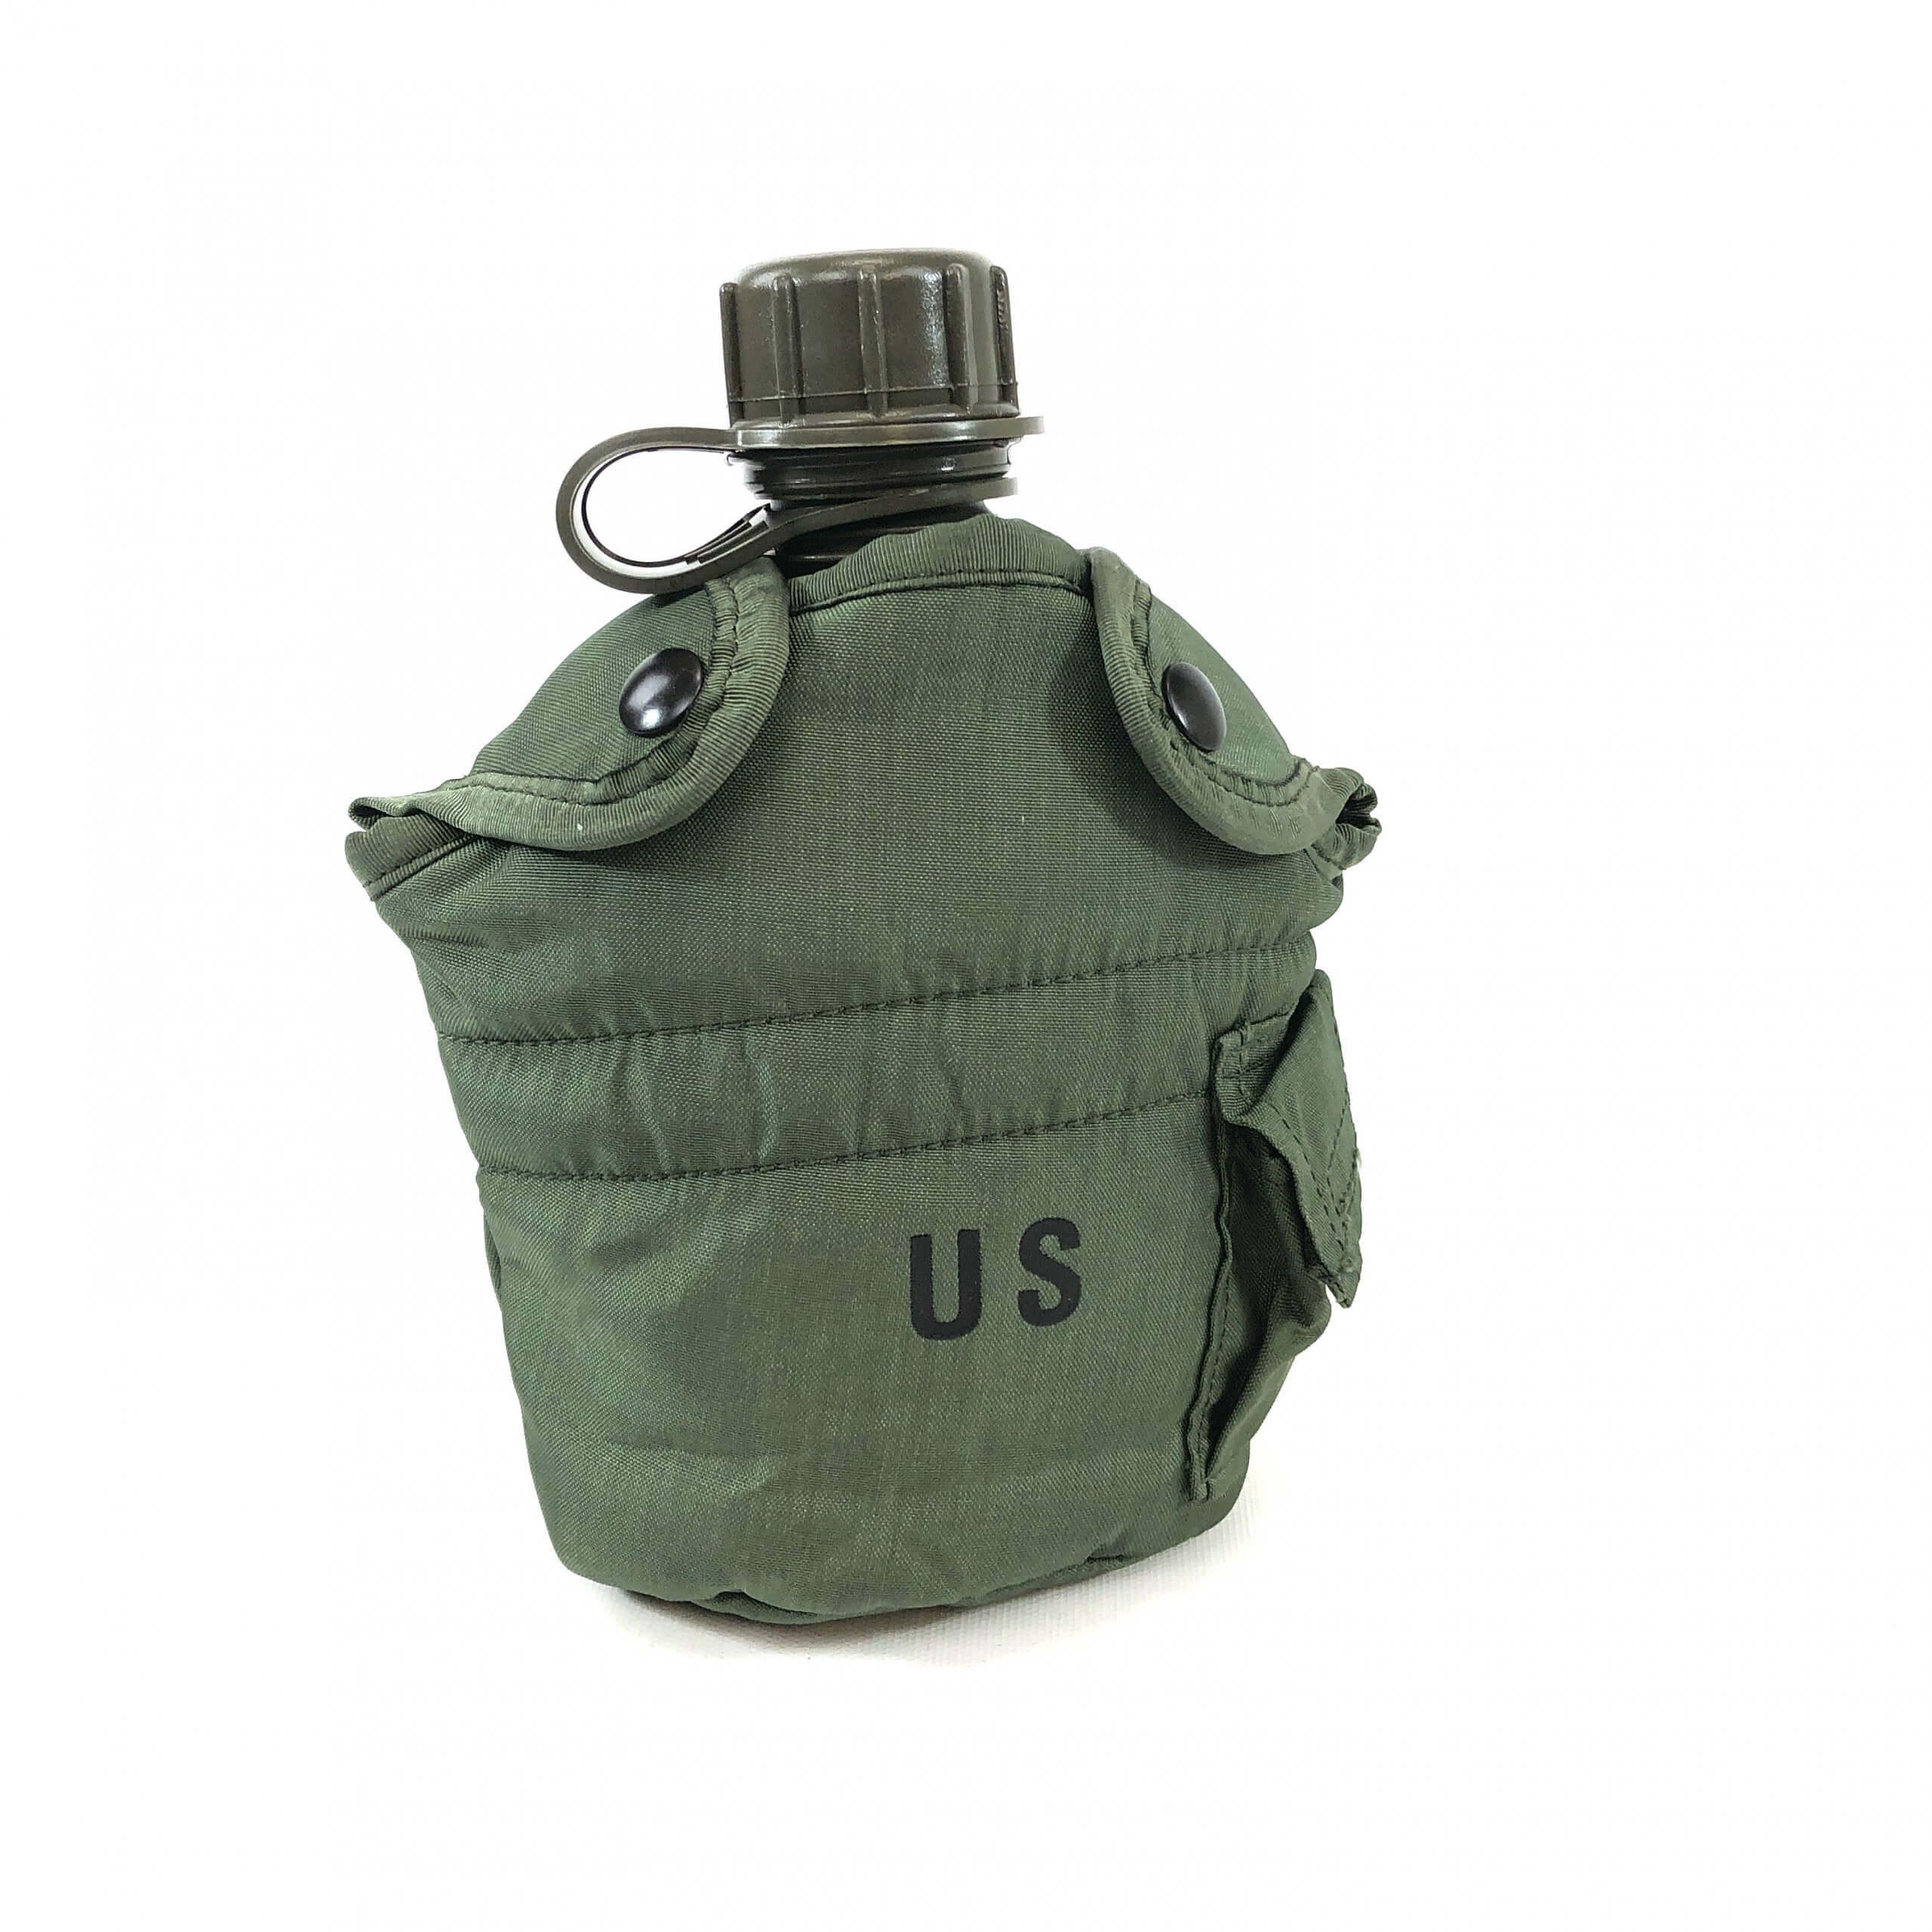 Genuine US Military 1 QUART CANTEEN COVER 1QT OD CARRIER POUCH w ALICE CLIPS GC 